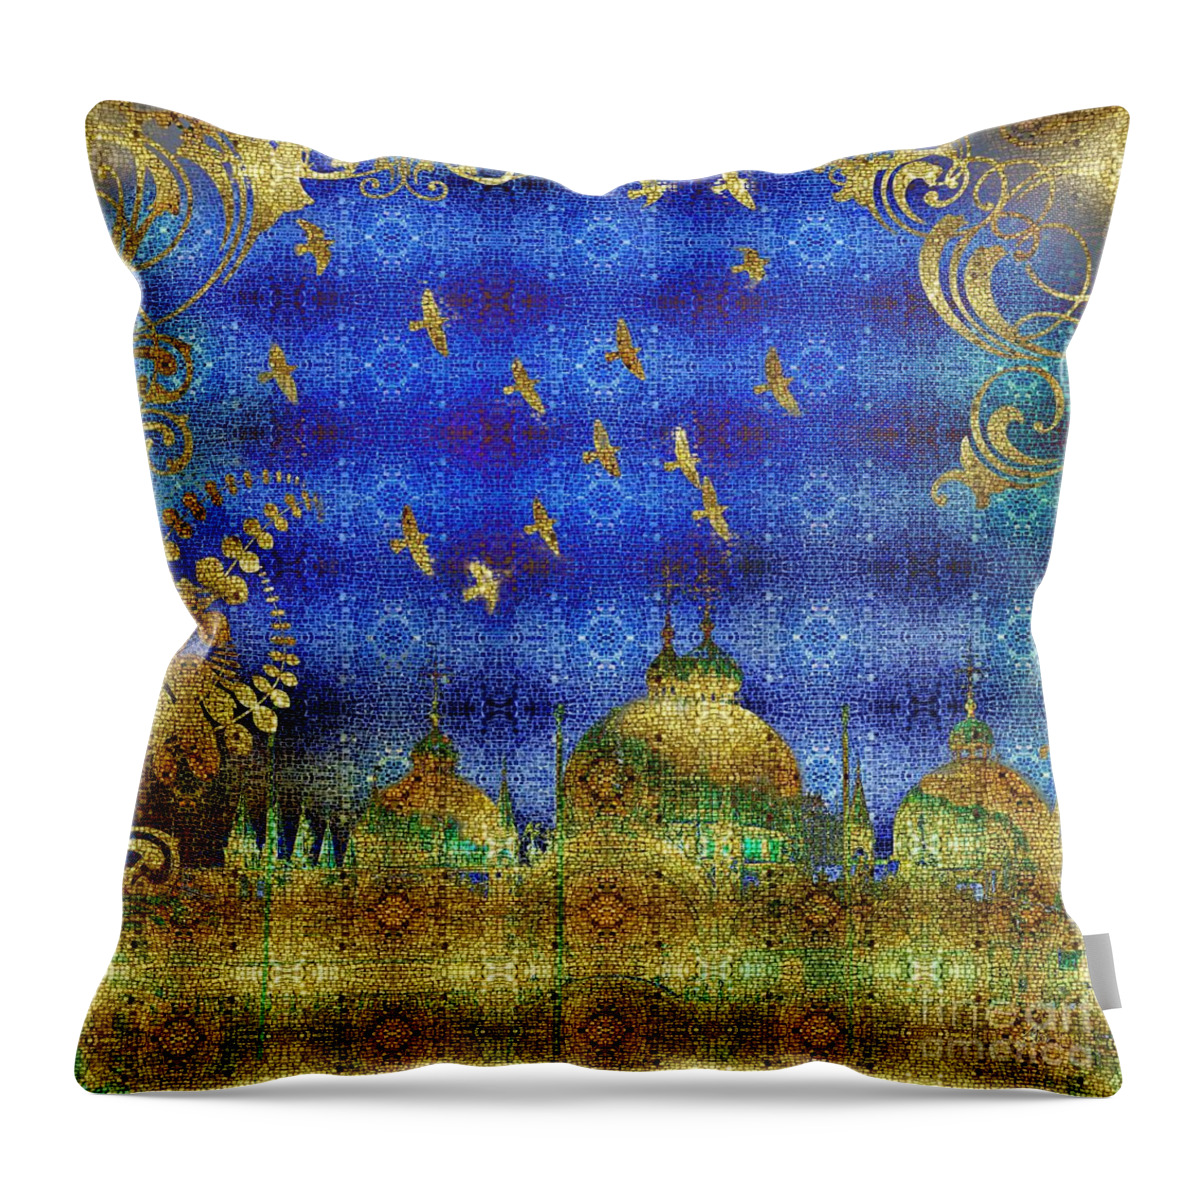 San Marco Throw Pillow featuring the digital art San Marco by Mo T